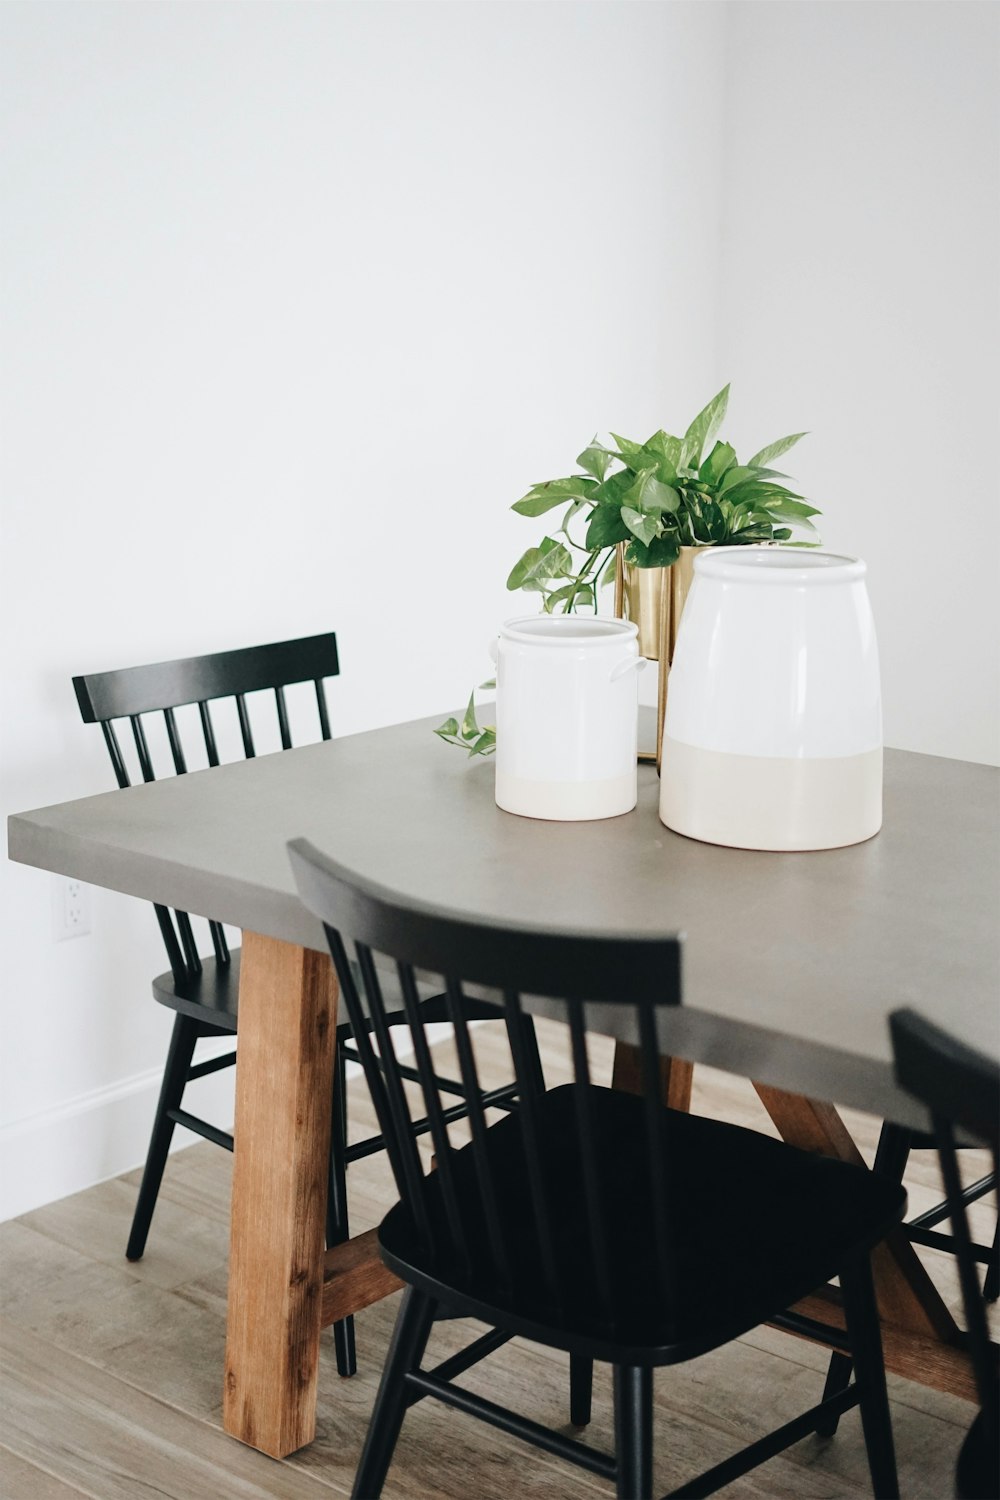 rectangular black wooden table with chairs